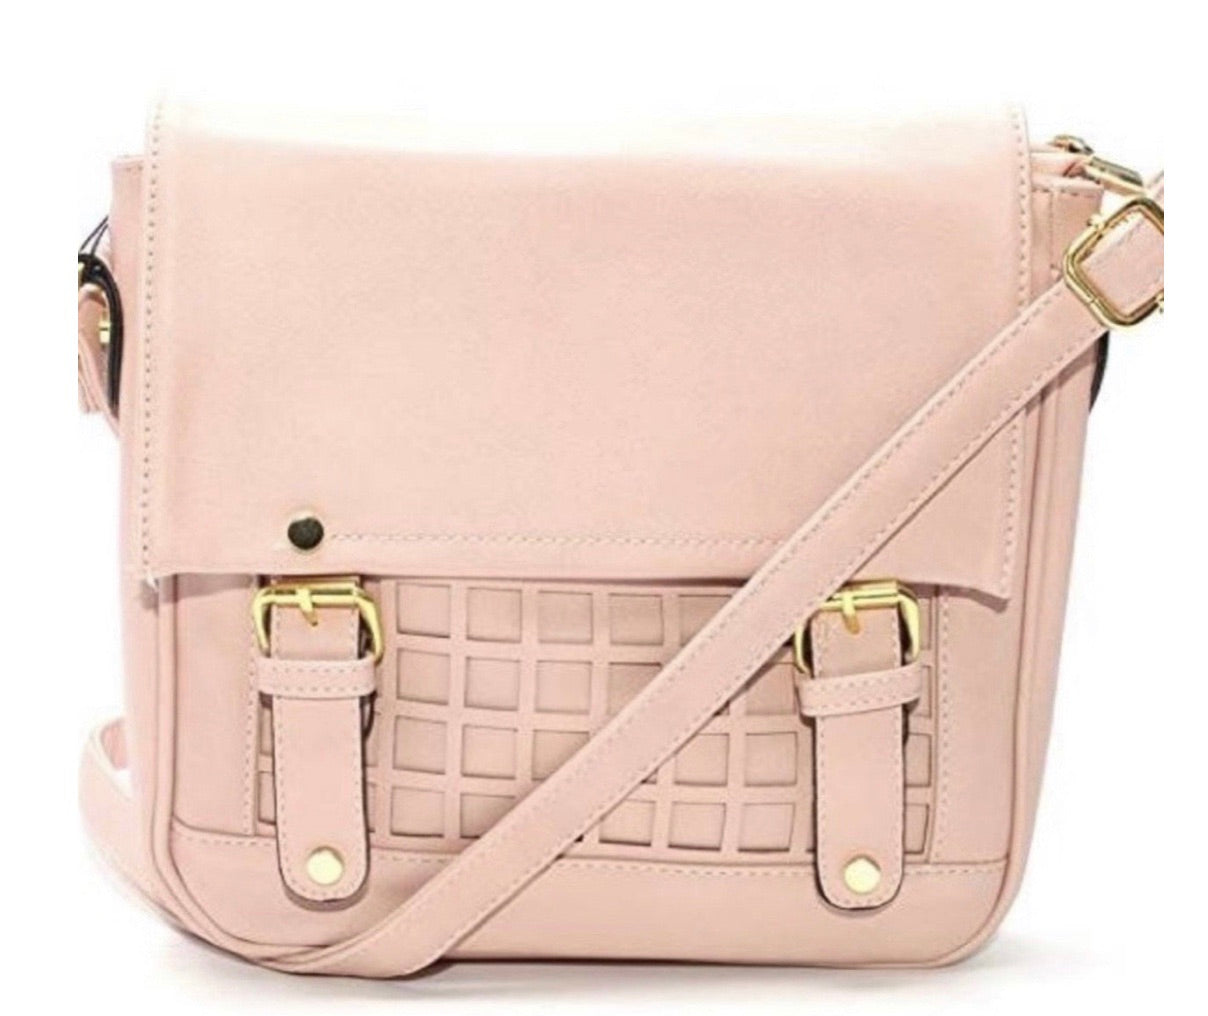 Pretty in light pink purse or The PPP!